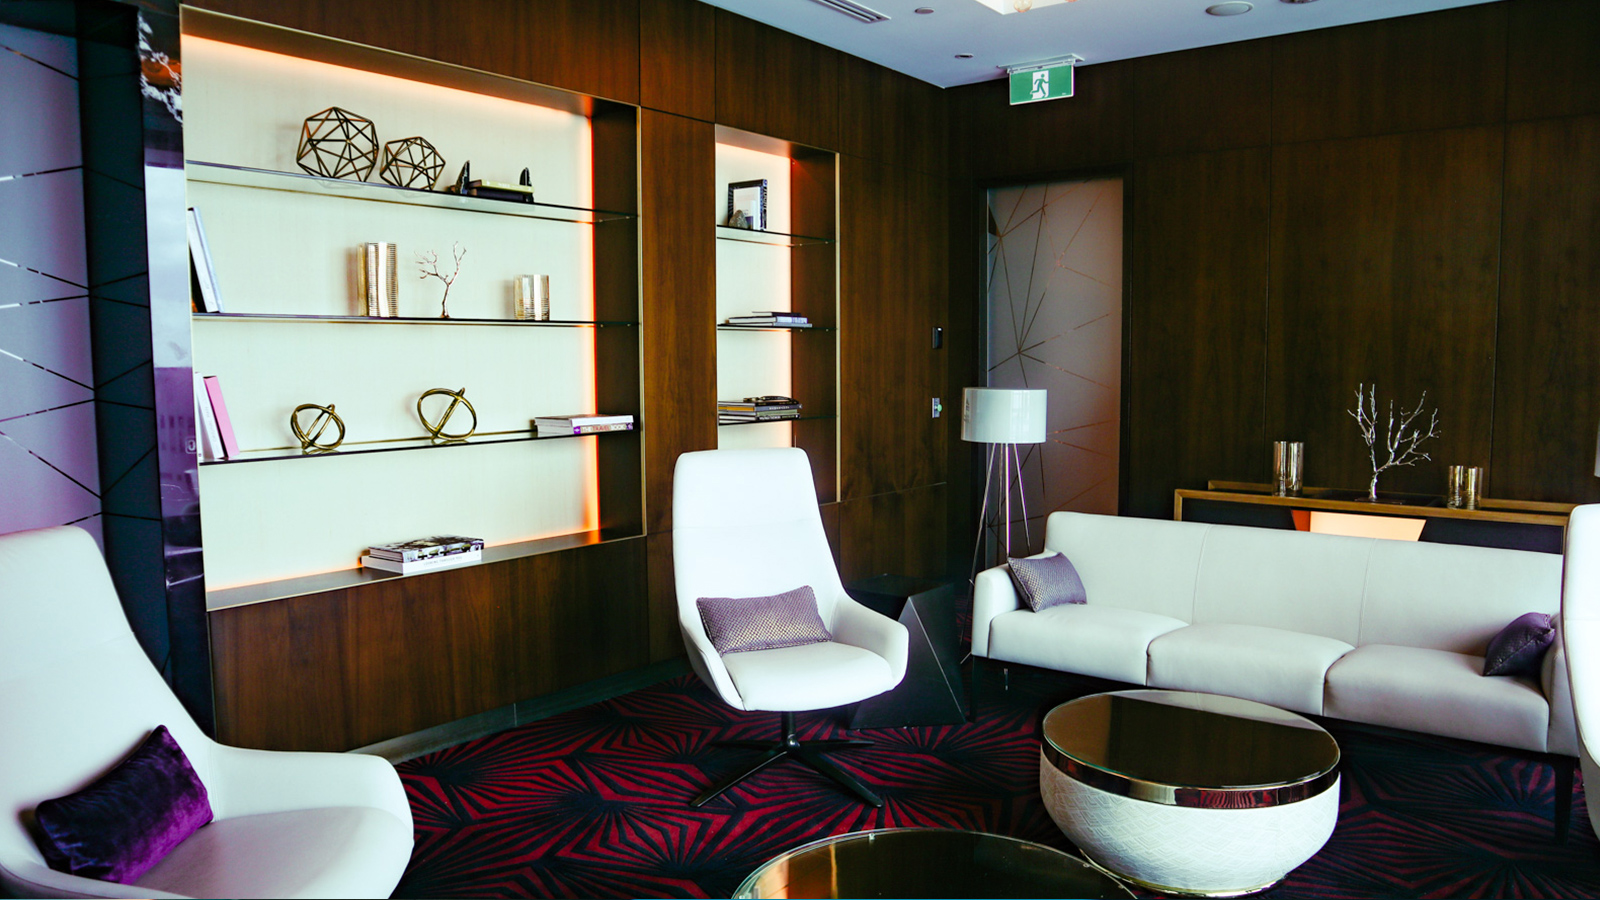 VIP Room at The House lounge, Melbourne